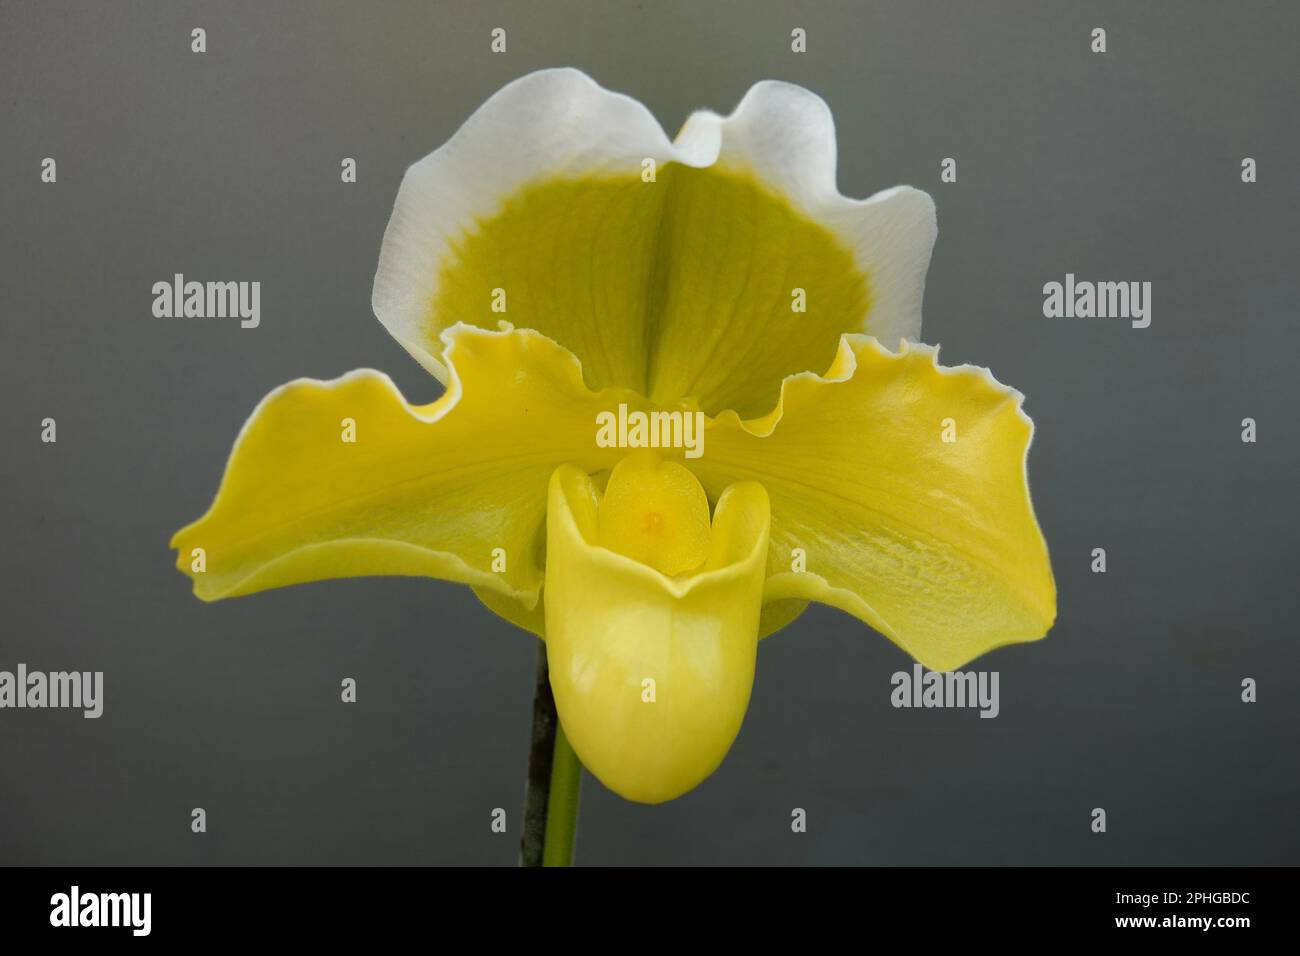 Close-up photo of white and yellow Paphiopedilum Stone Lovely orchid flower isolated on gray background. Romantic and botany concept. Stock Photo